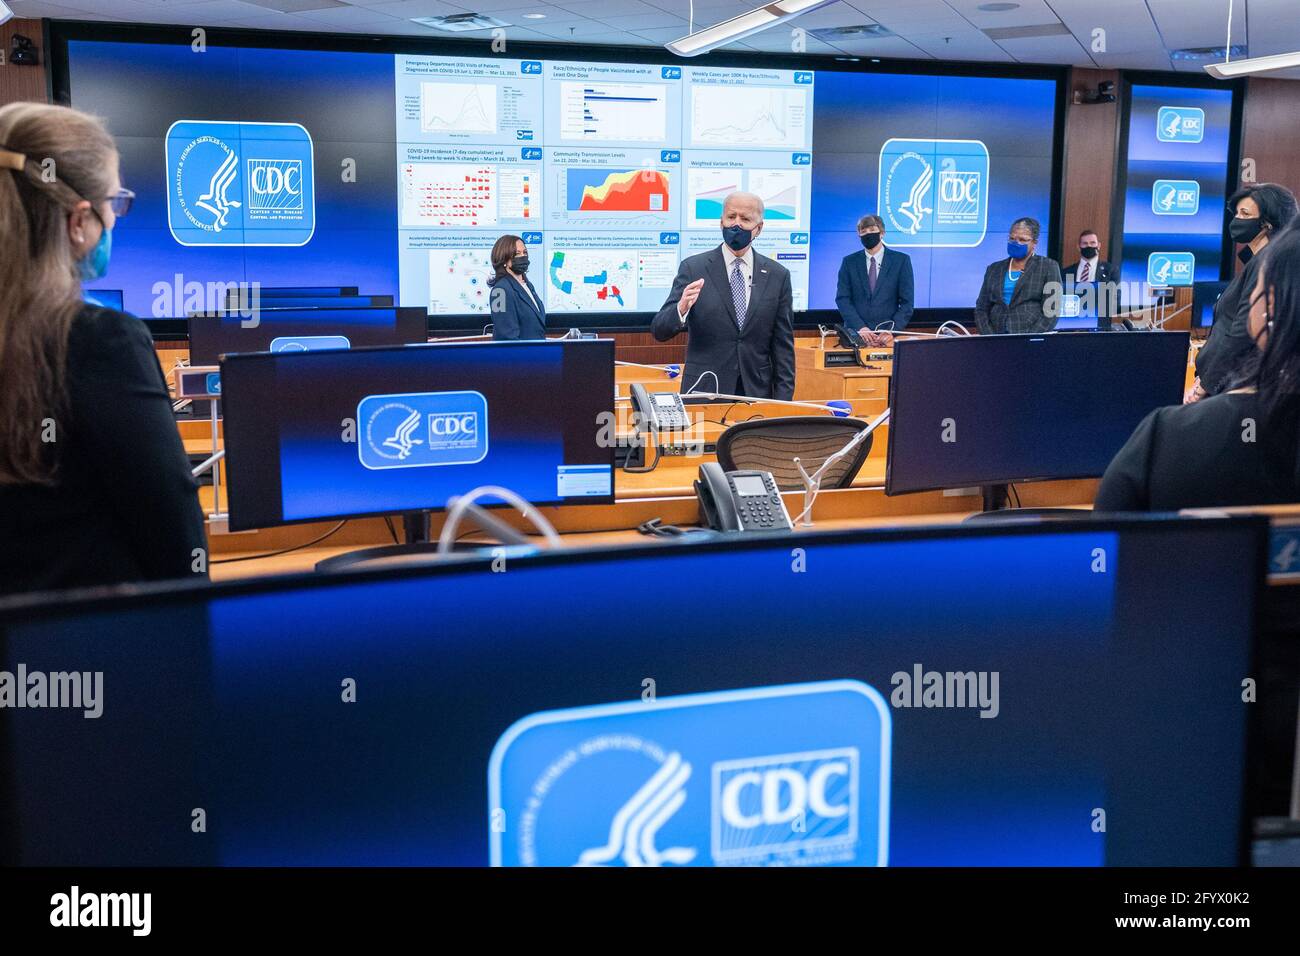 President Joe Biden, joined by Vice President Kamala Harris and Director of the Centers for Disease Control (CDC) Dr. Rochelle Walensky, talks with CDC staff during a briefing Friday, March 19, 2021, at the CDC headquarters in Atlanta. (Official White House Photo by Adam Schultz) Stock Photo